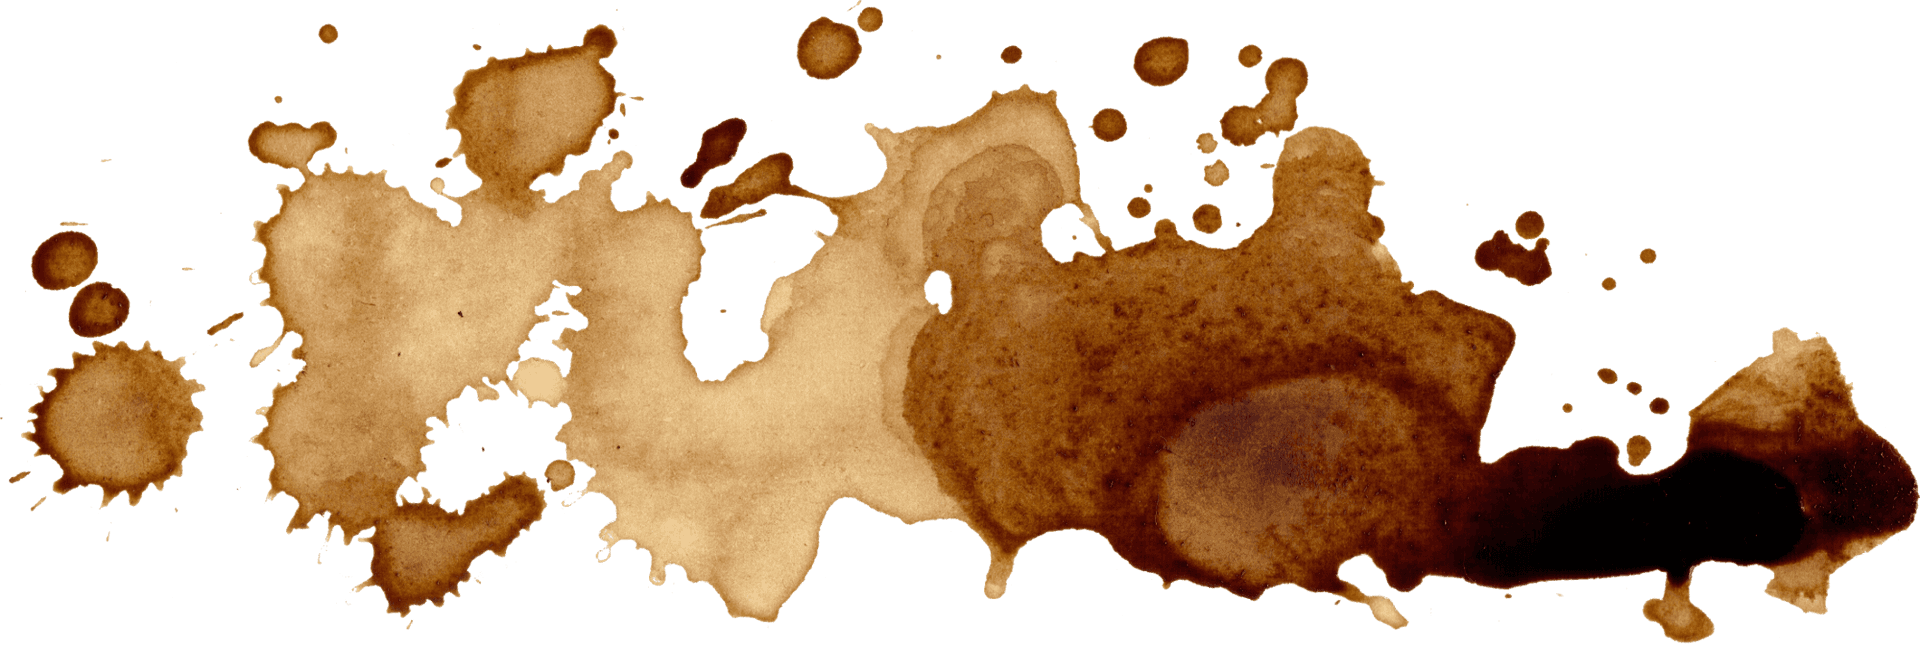 Coffee Stain Splatter Texture PNG image